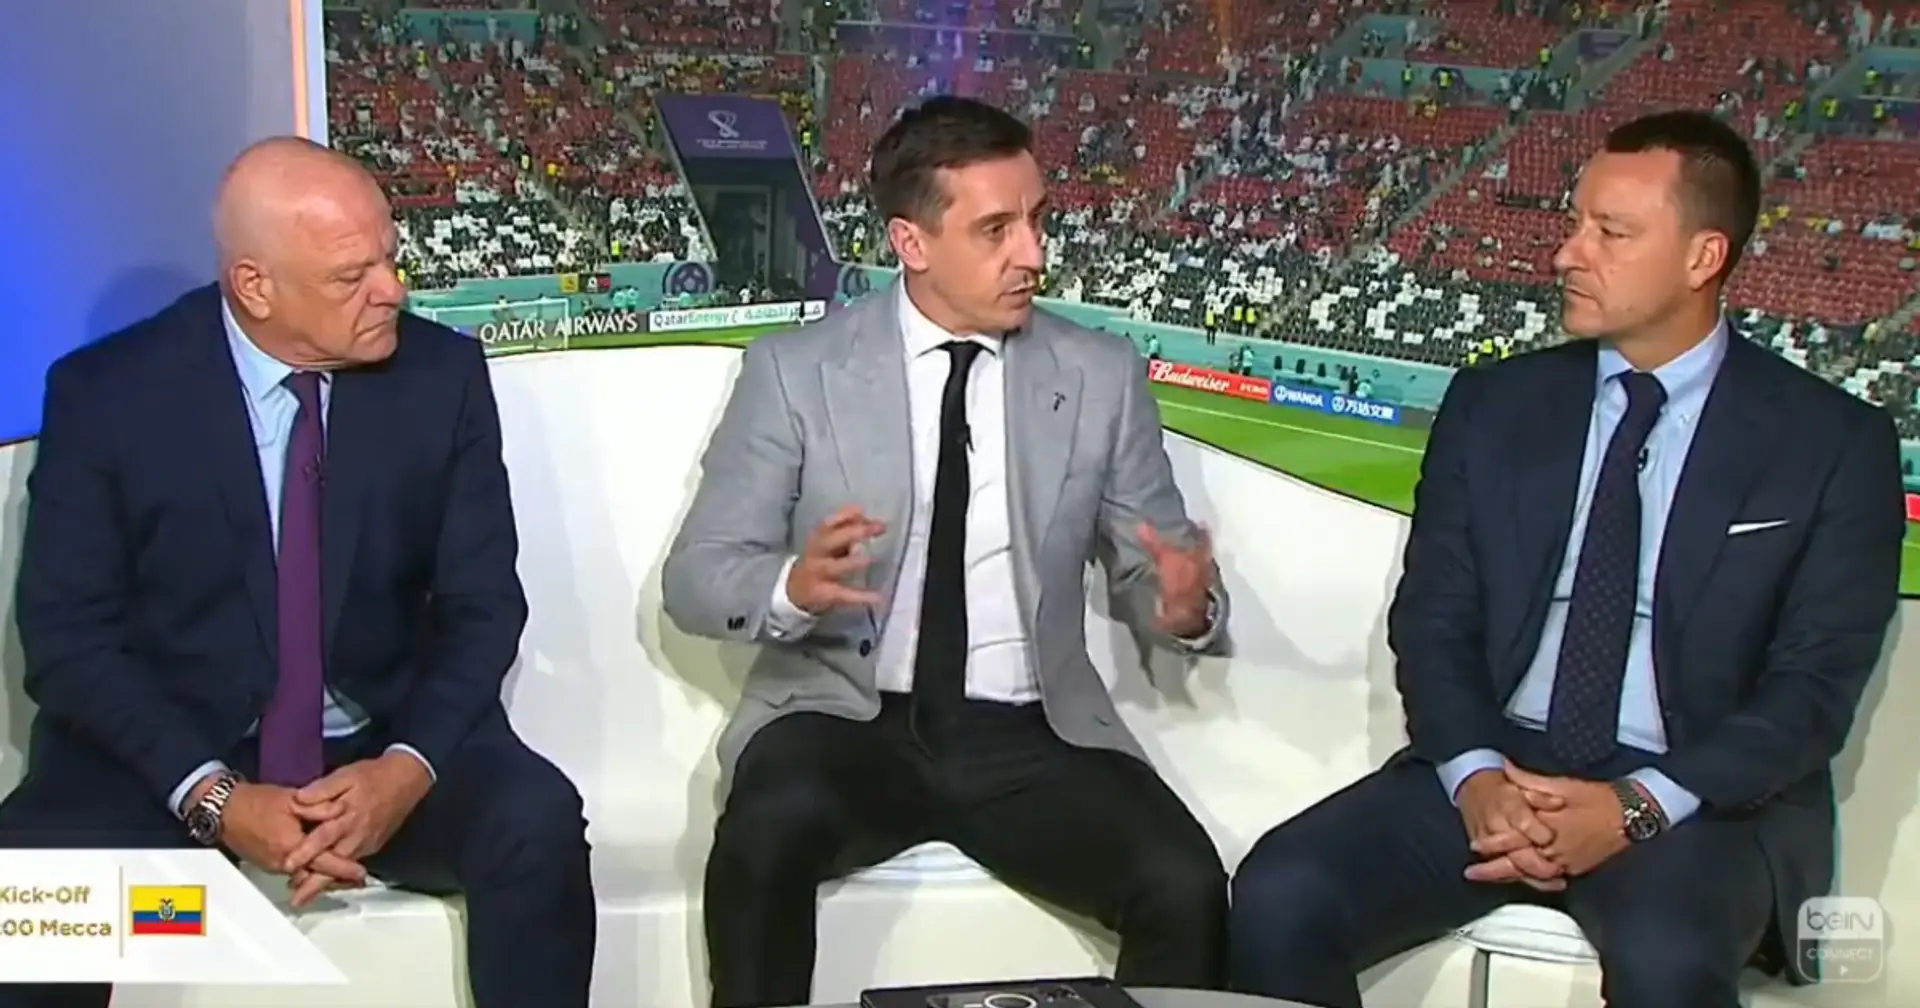 Gary Neville: 'There should be a World Cup in a Muslim country, there should be a World Cup in the Middle East'